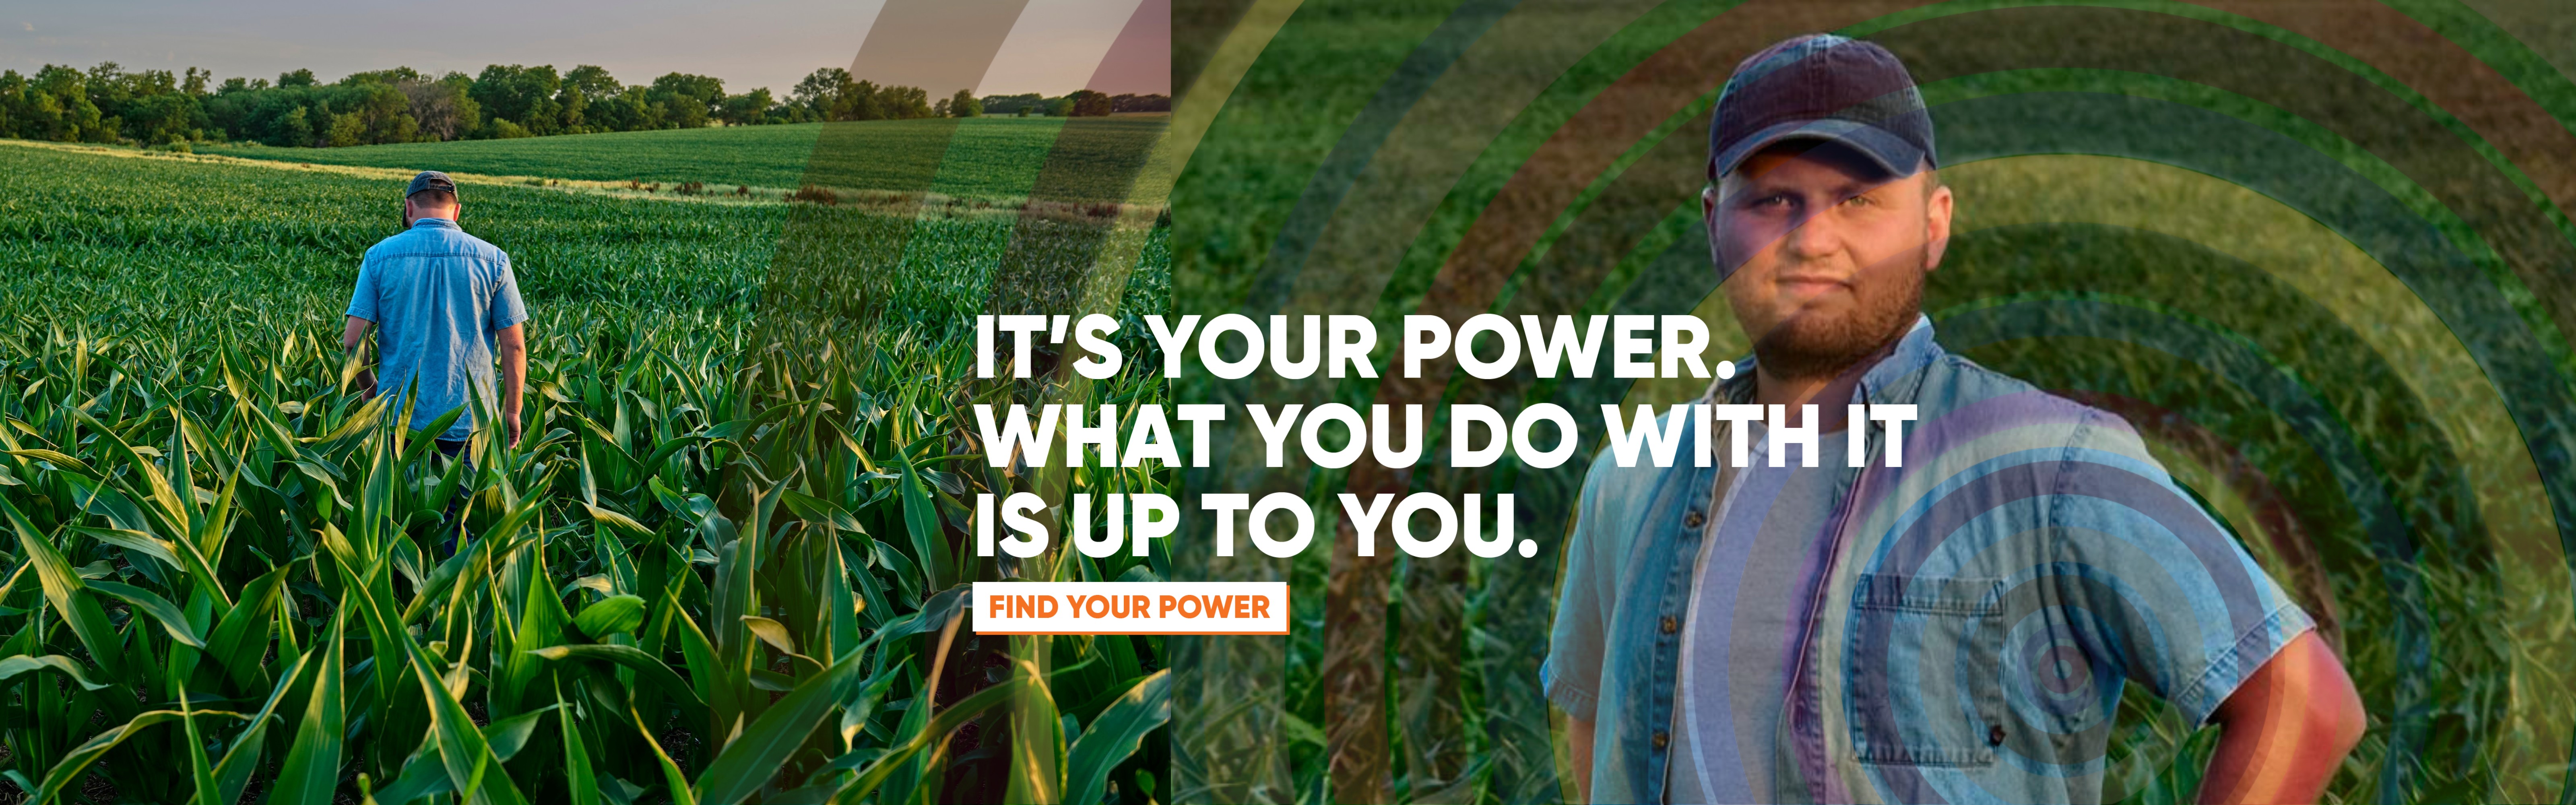 It's your power. What you do with it is up to you. Click here to find your power.